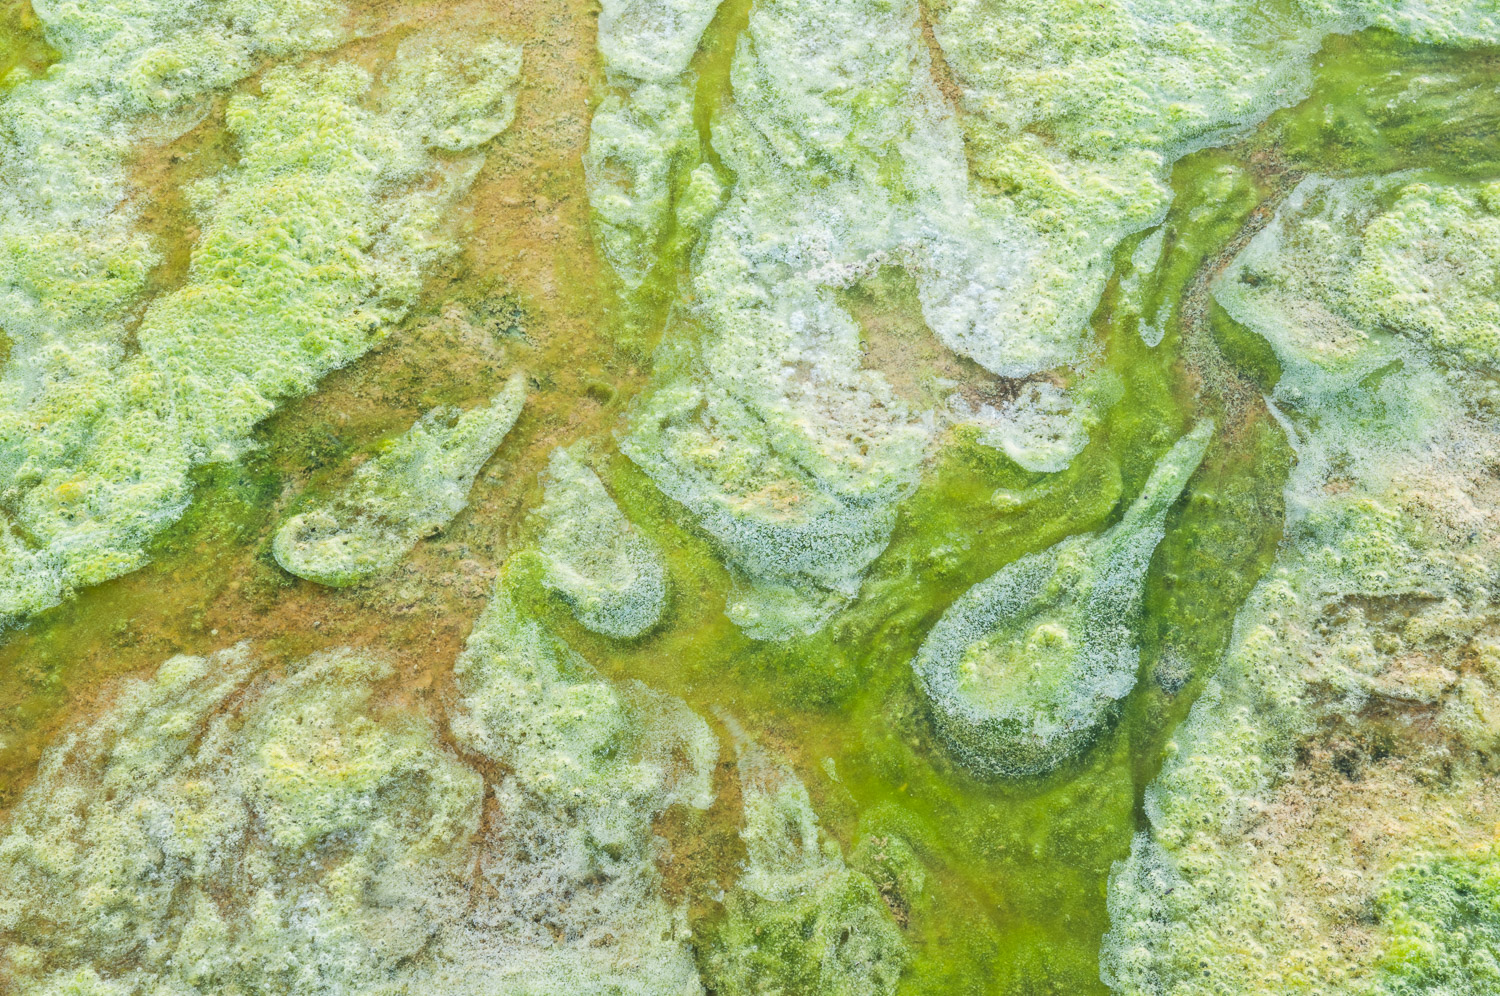 Bacterial and algae mats created by the growth of heat loving (thermophile) bacteria in the mineral laden water of hot springs...